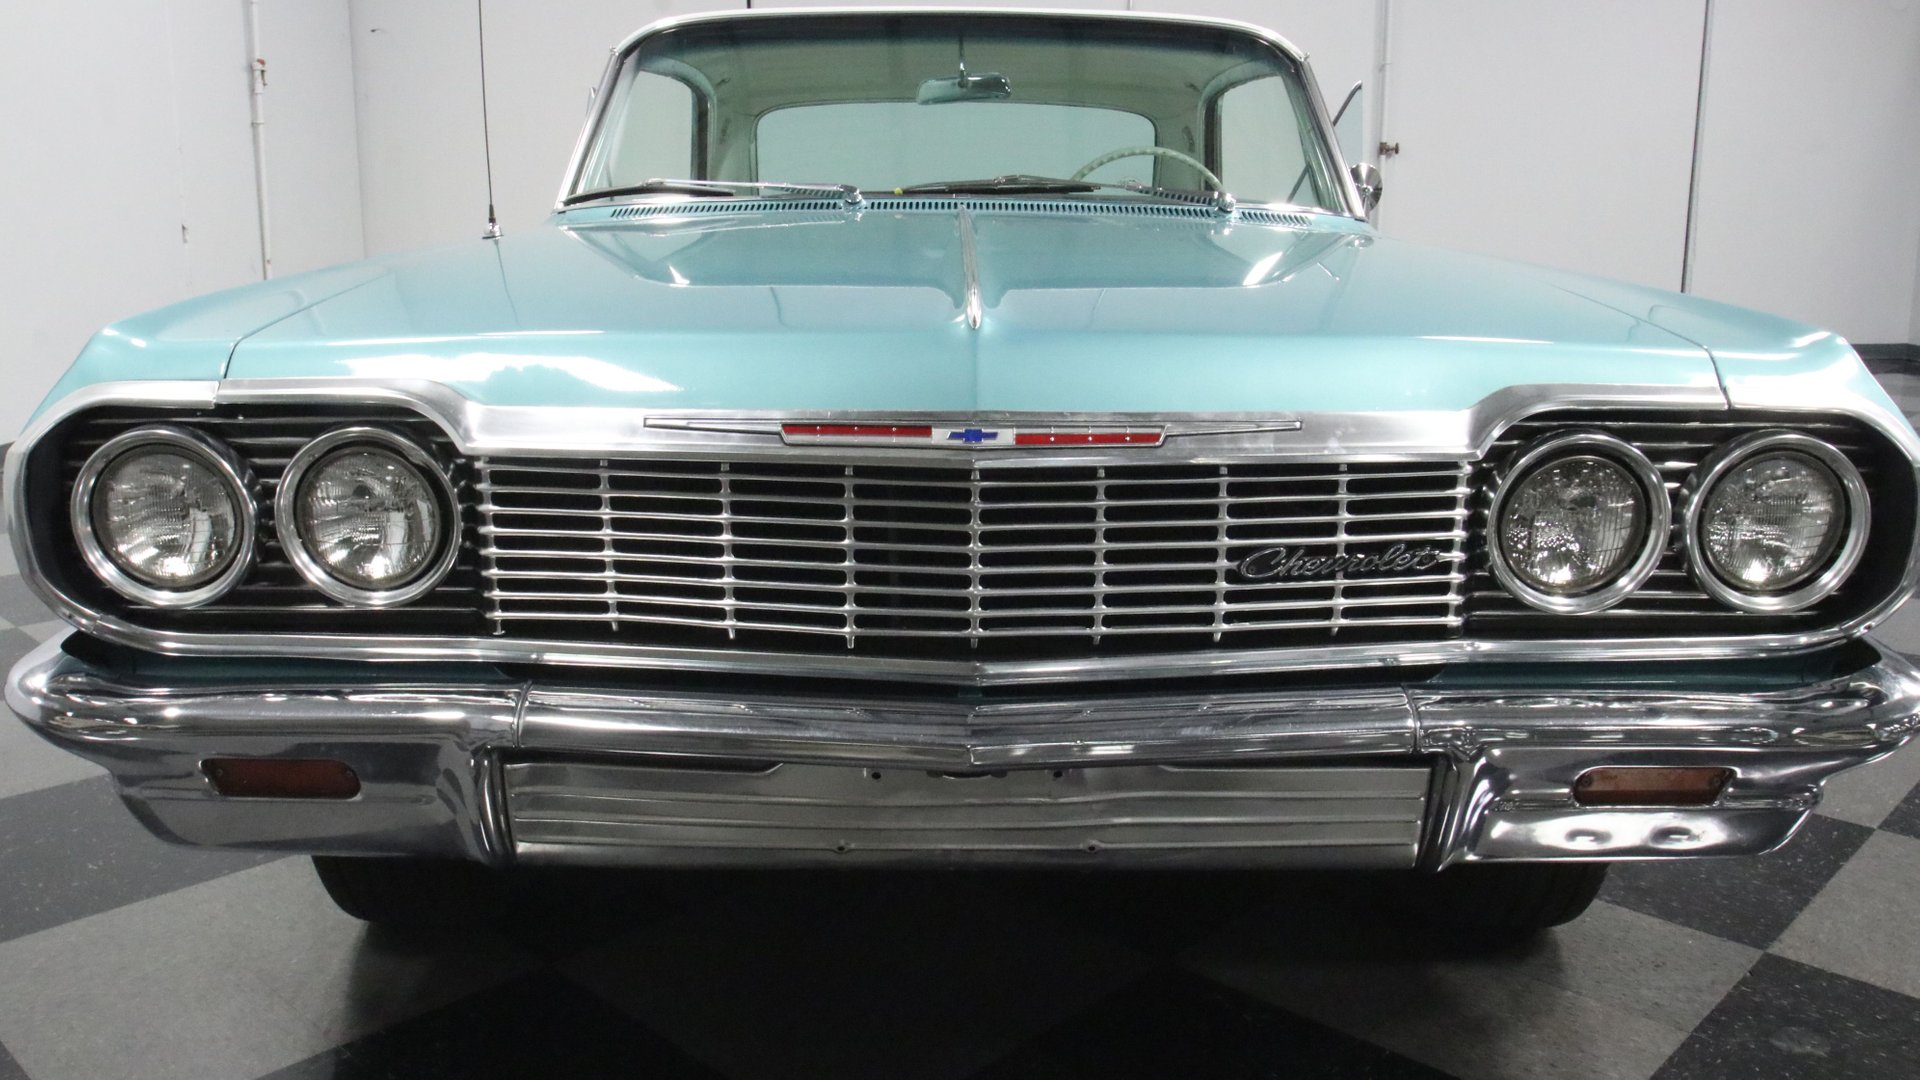 This 1961 Chevrolet Impala Convertible Is Aqua Awesome